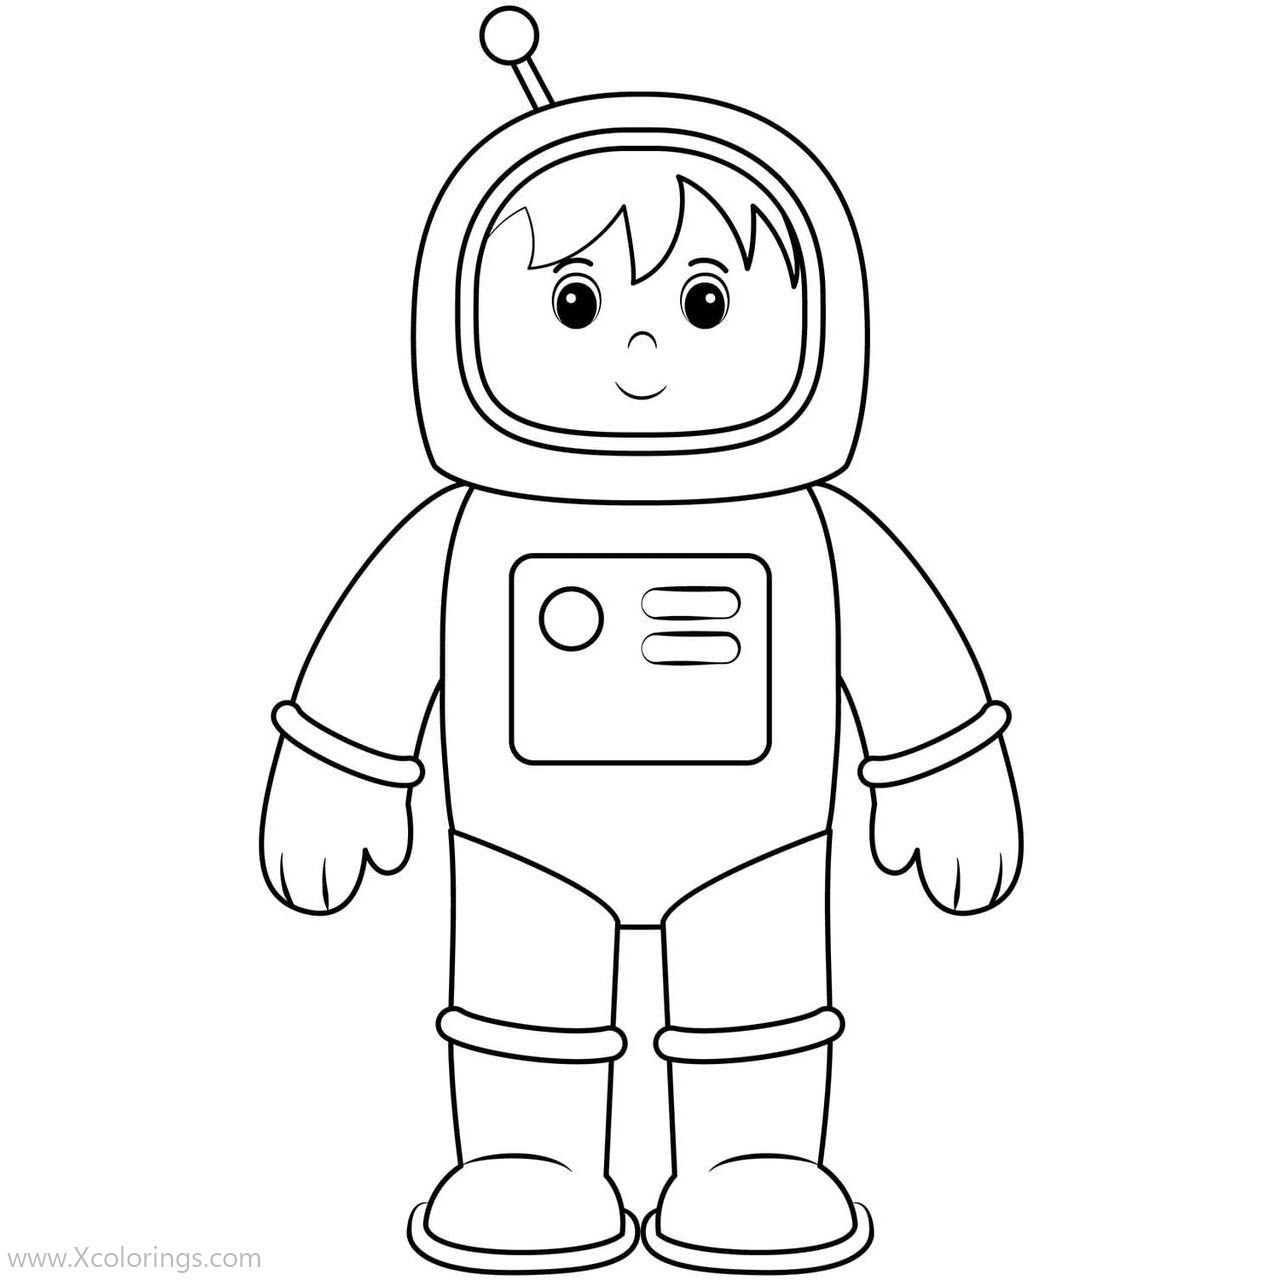 Free Simple Astronaut Coloring Pages for Kids printable